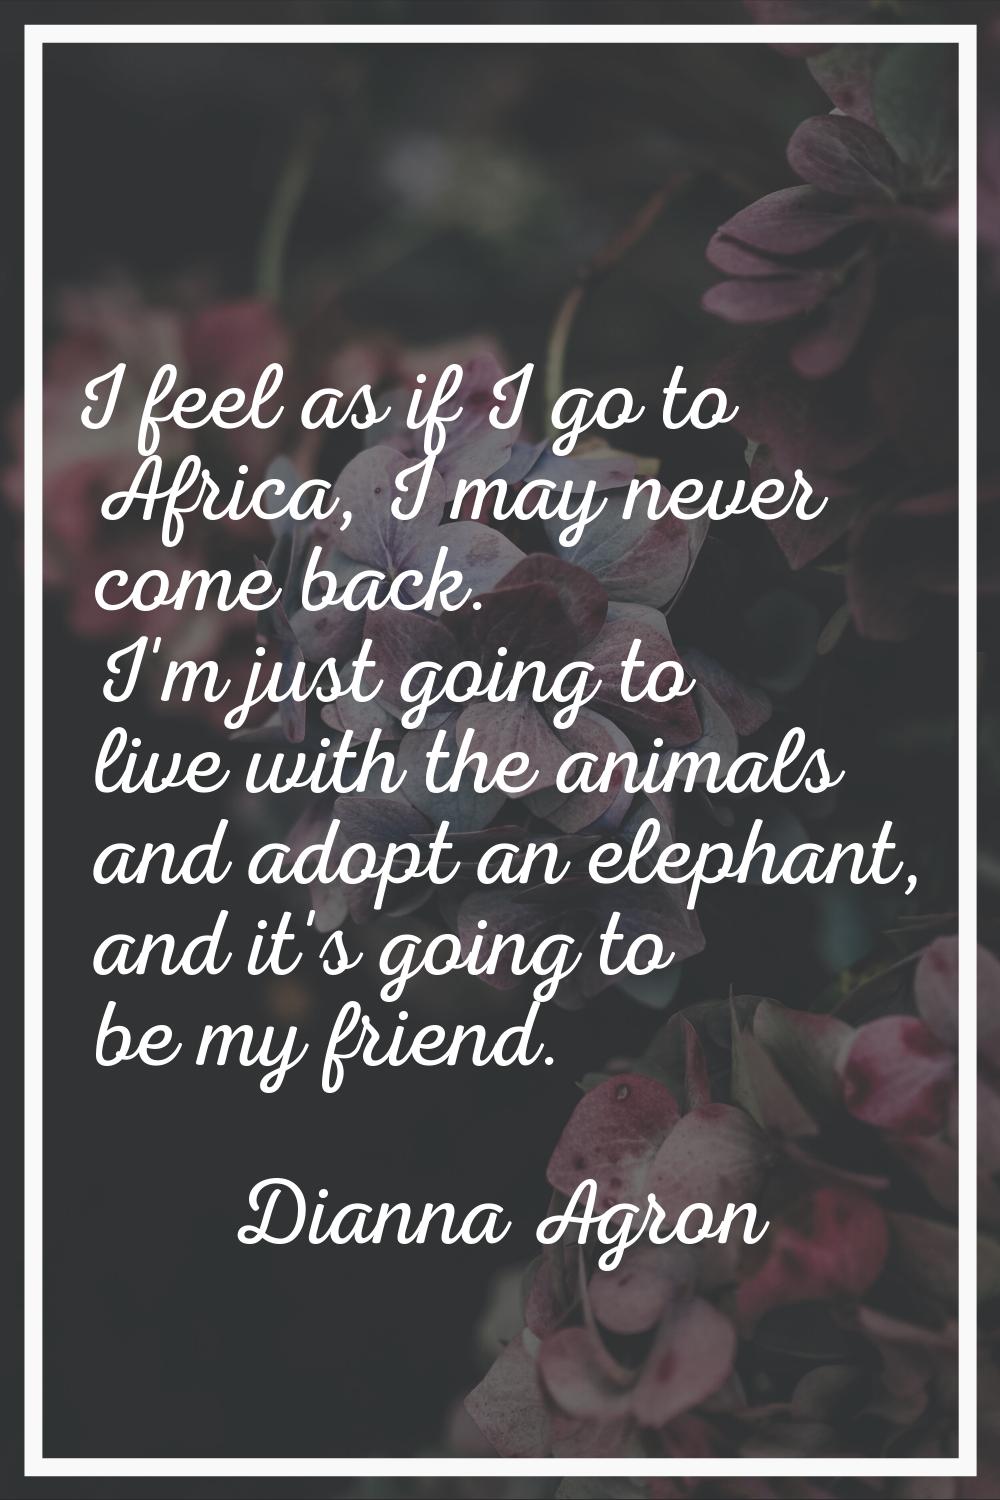 I feel as if I go to Africa, I may never come back. I'm just going to live with the animals and ado